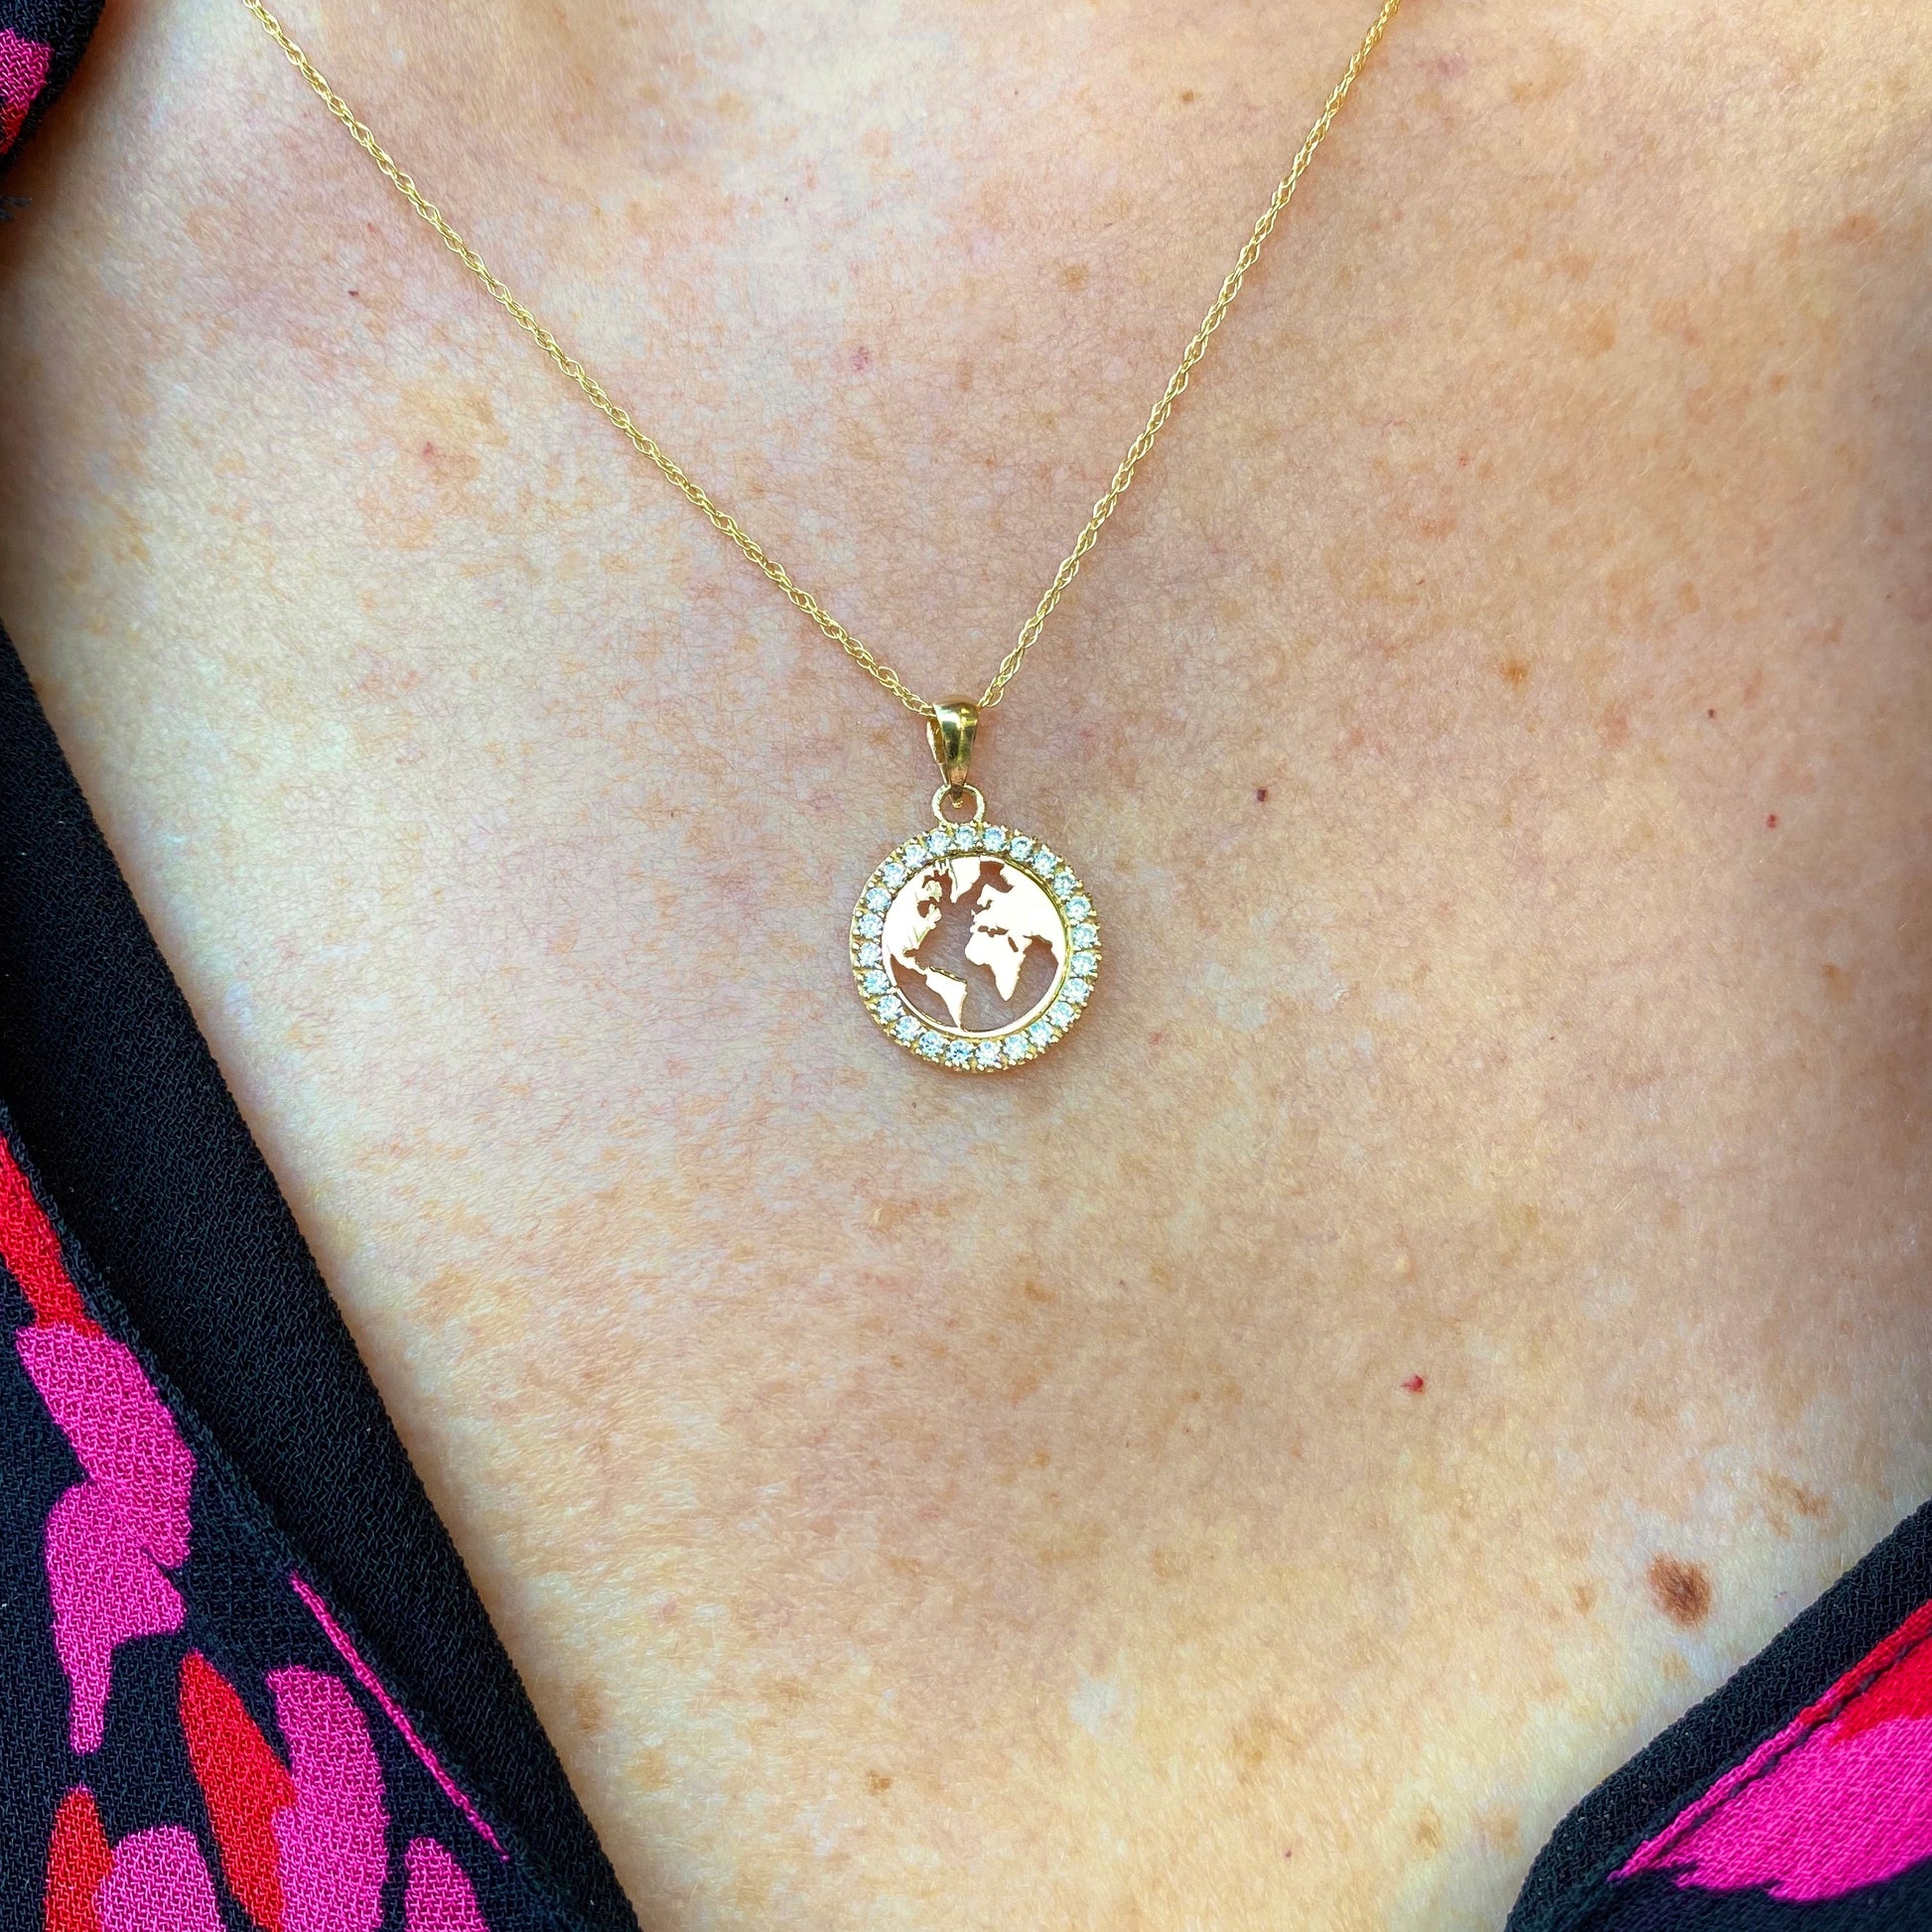 9ct Gold World Necklace with CZ Halo - John Ross Jewellers